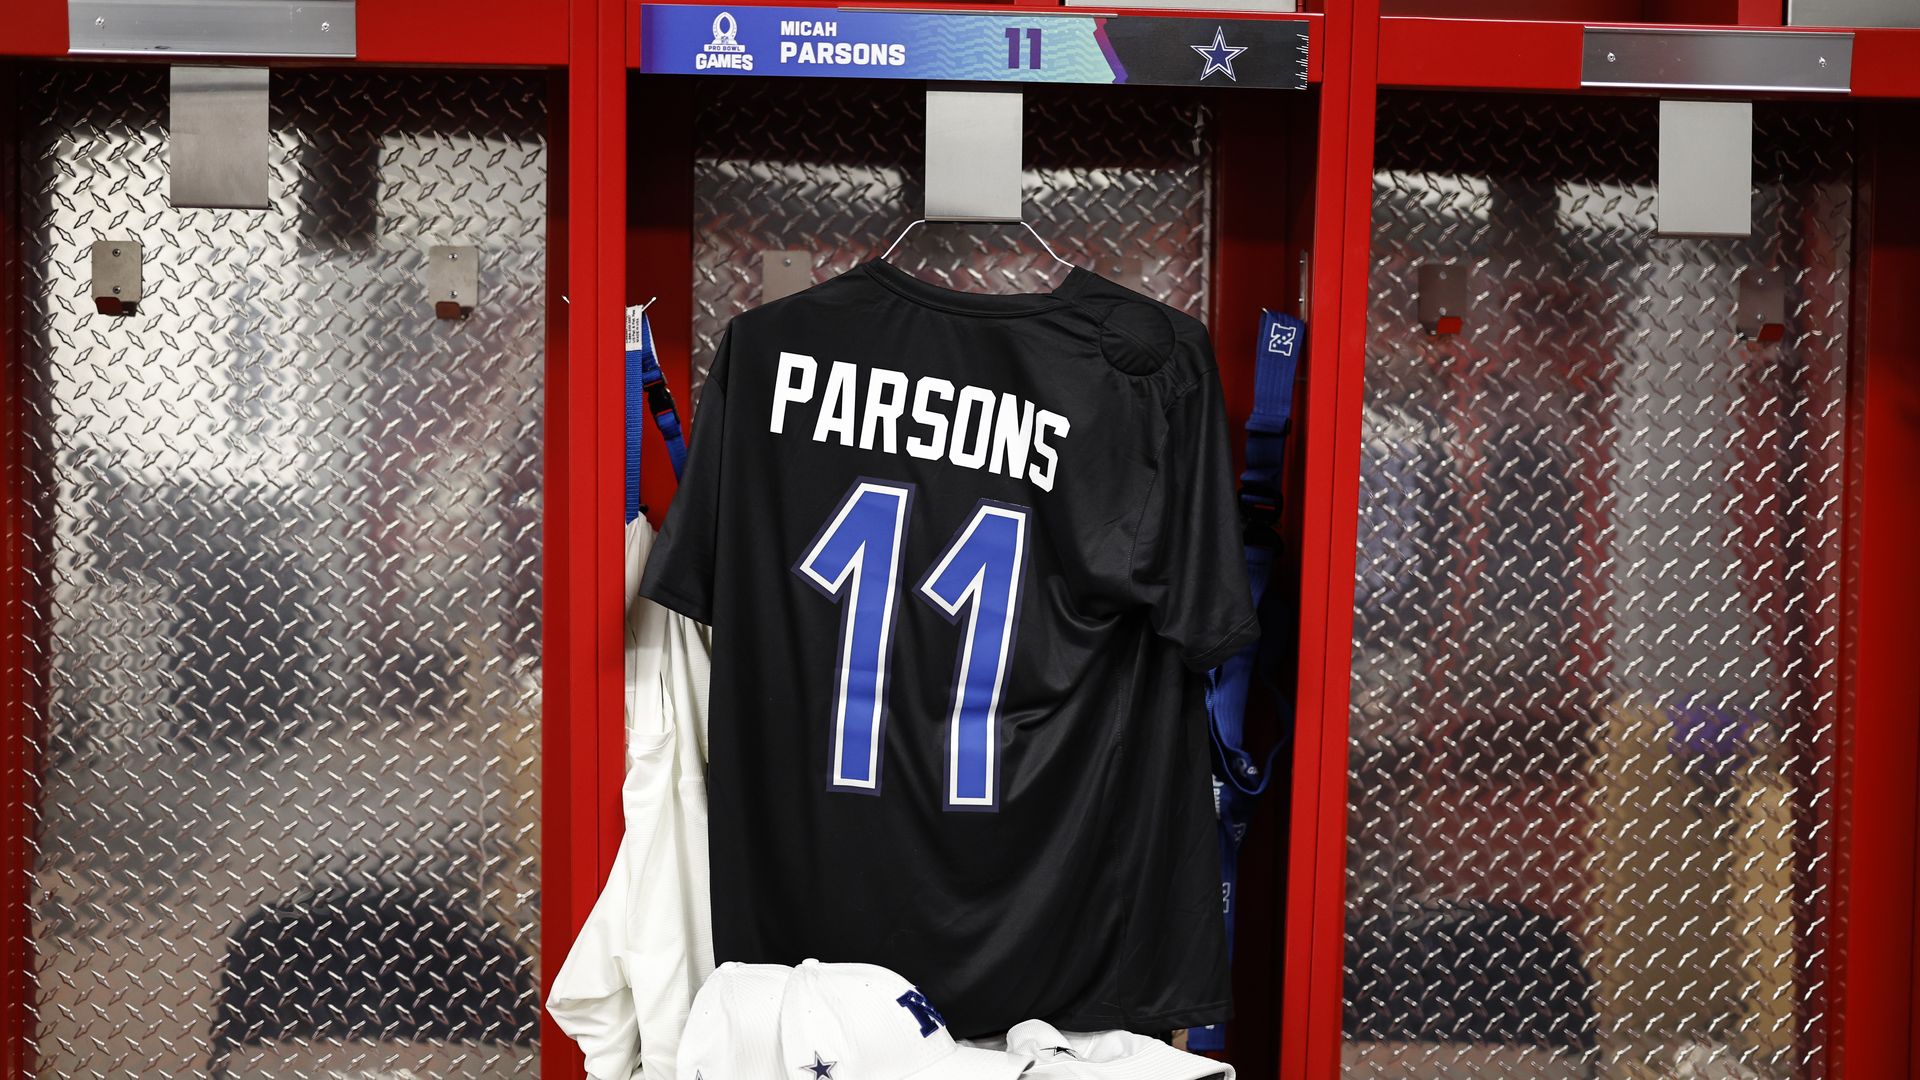 A black and blue jersey hangs in a red locker room